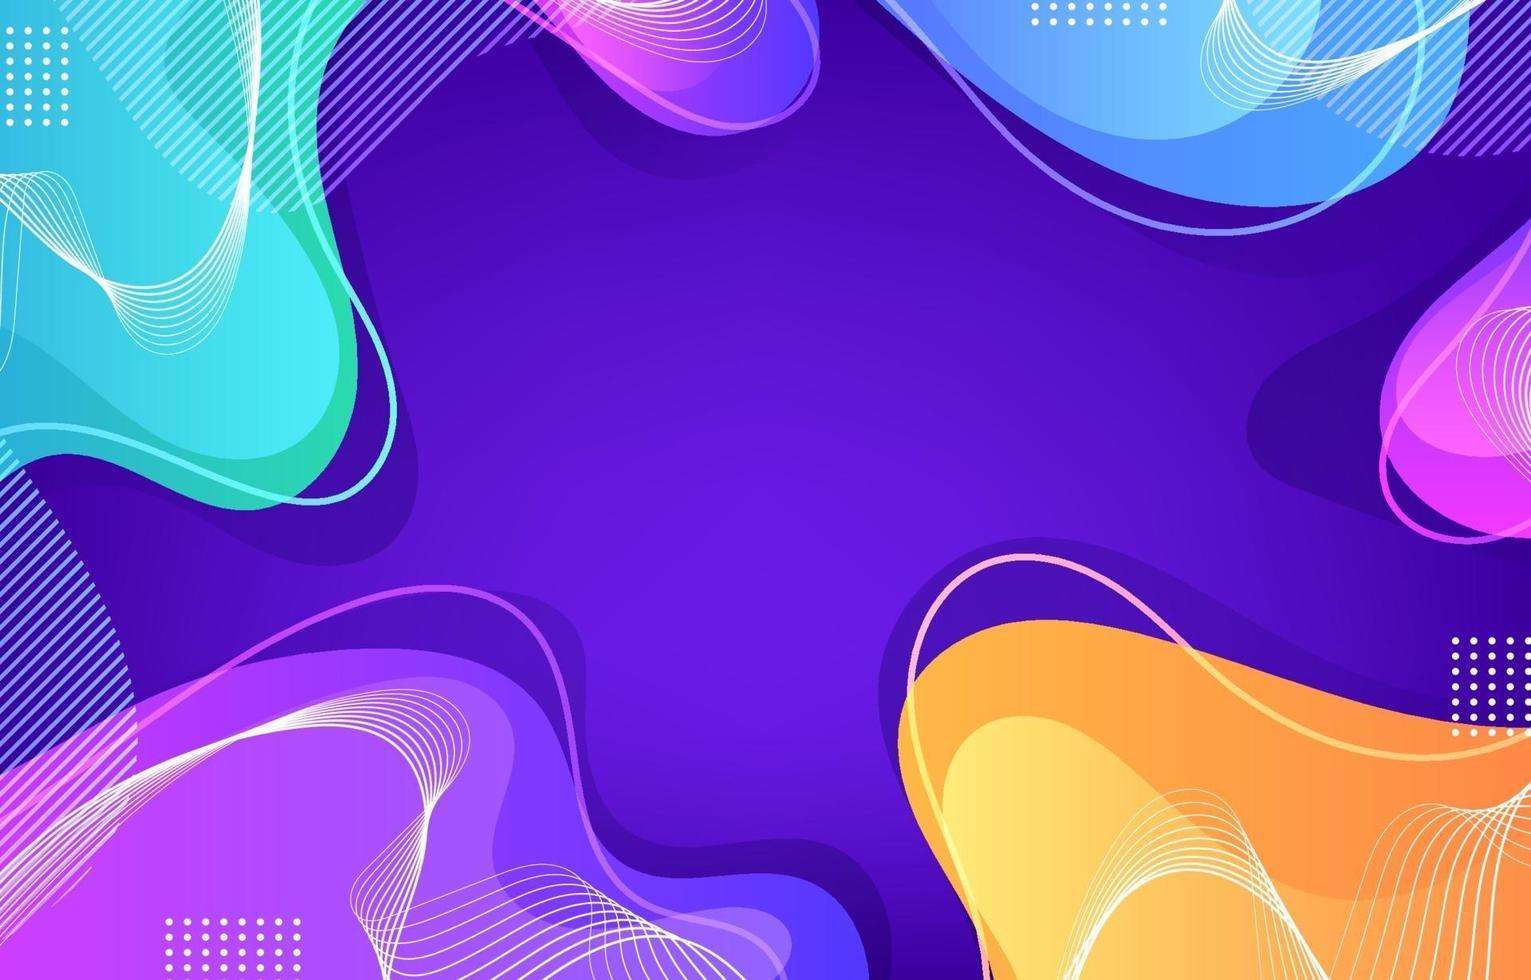 Abstract Colorful Shapes Background vector